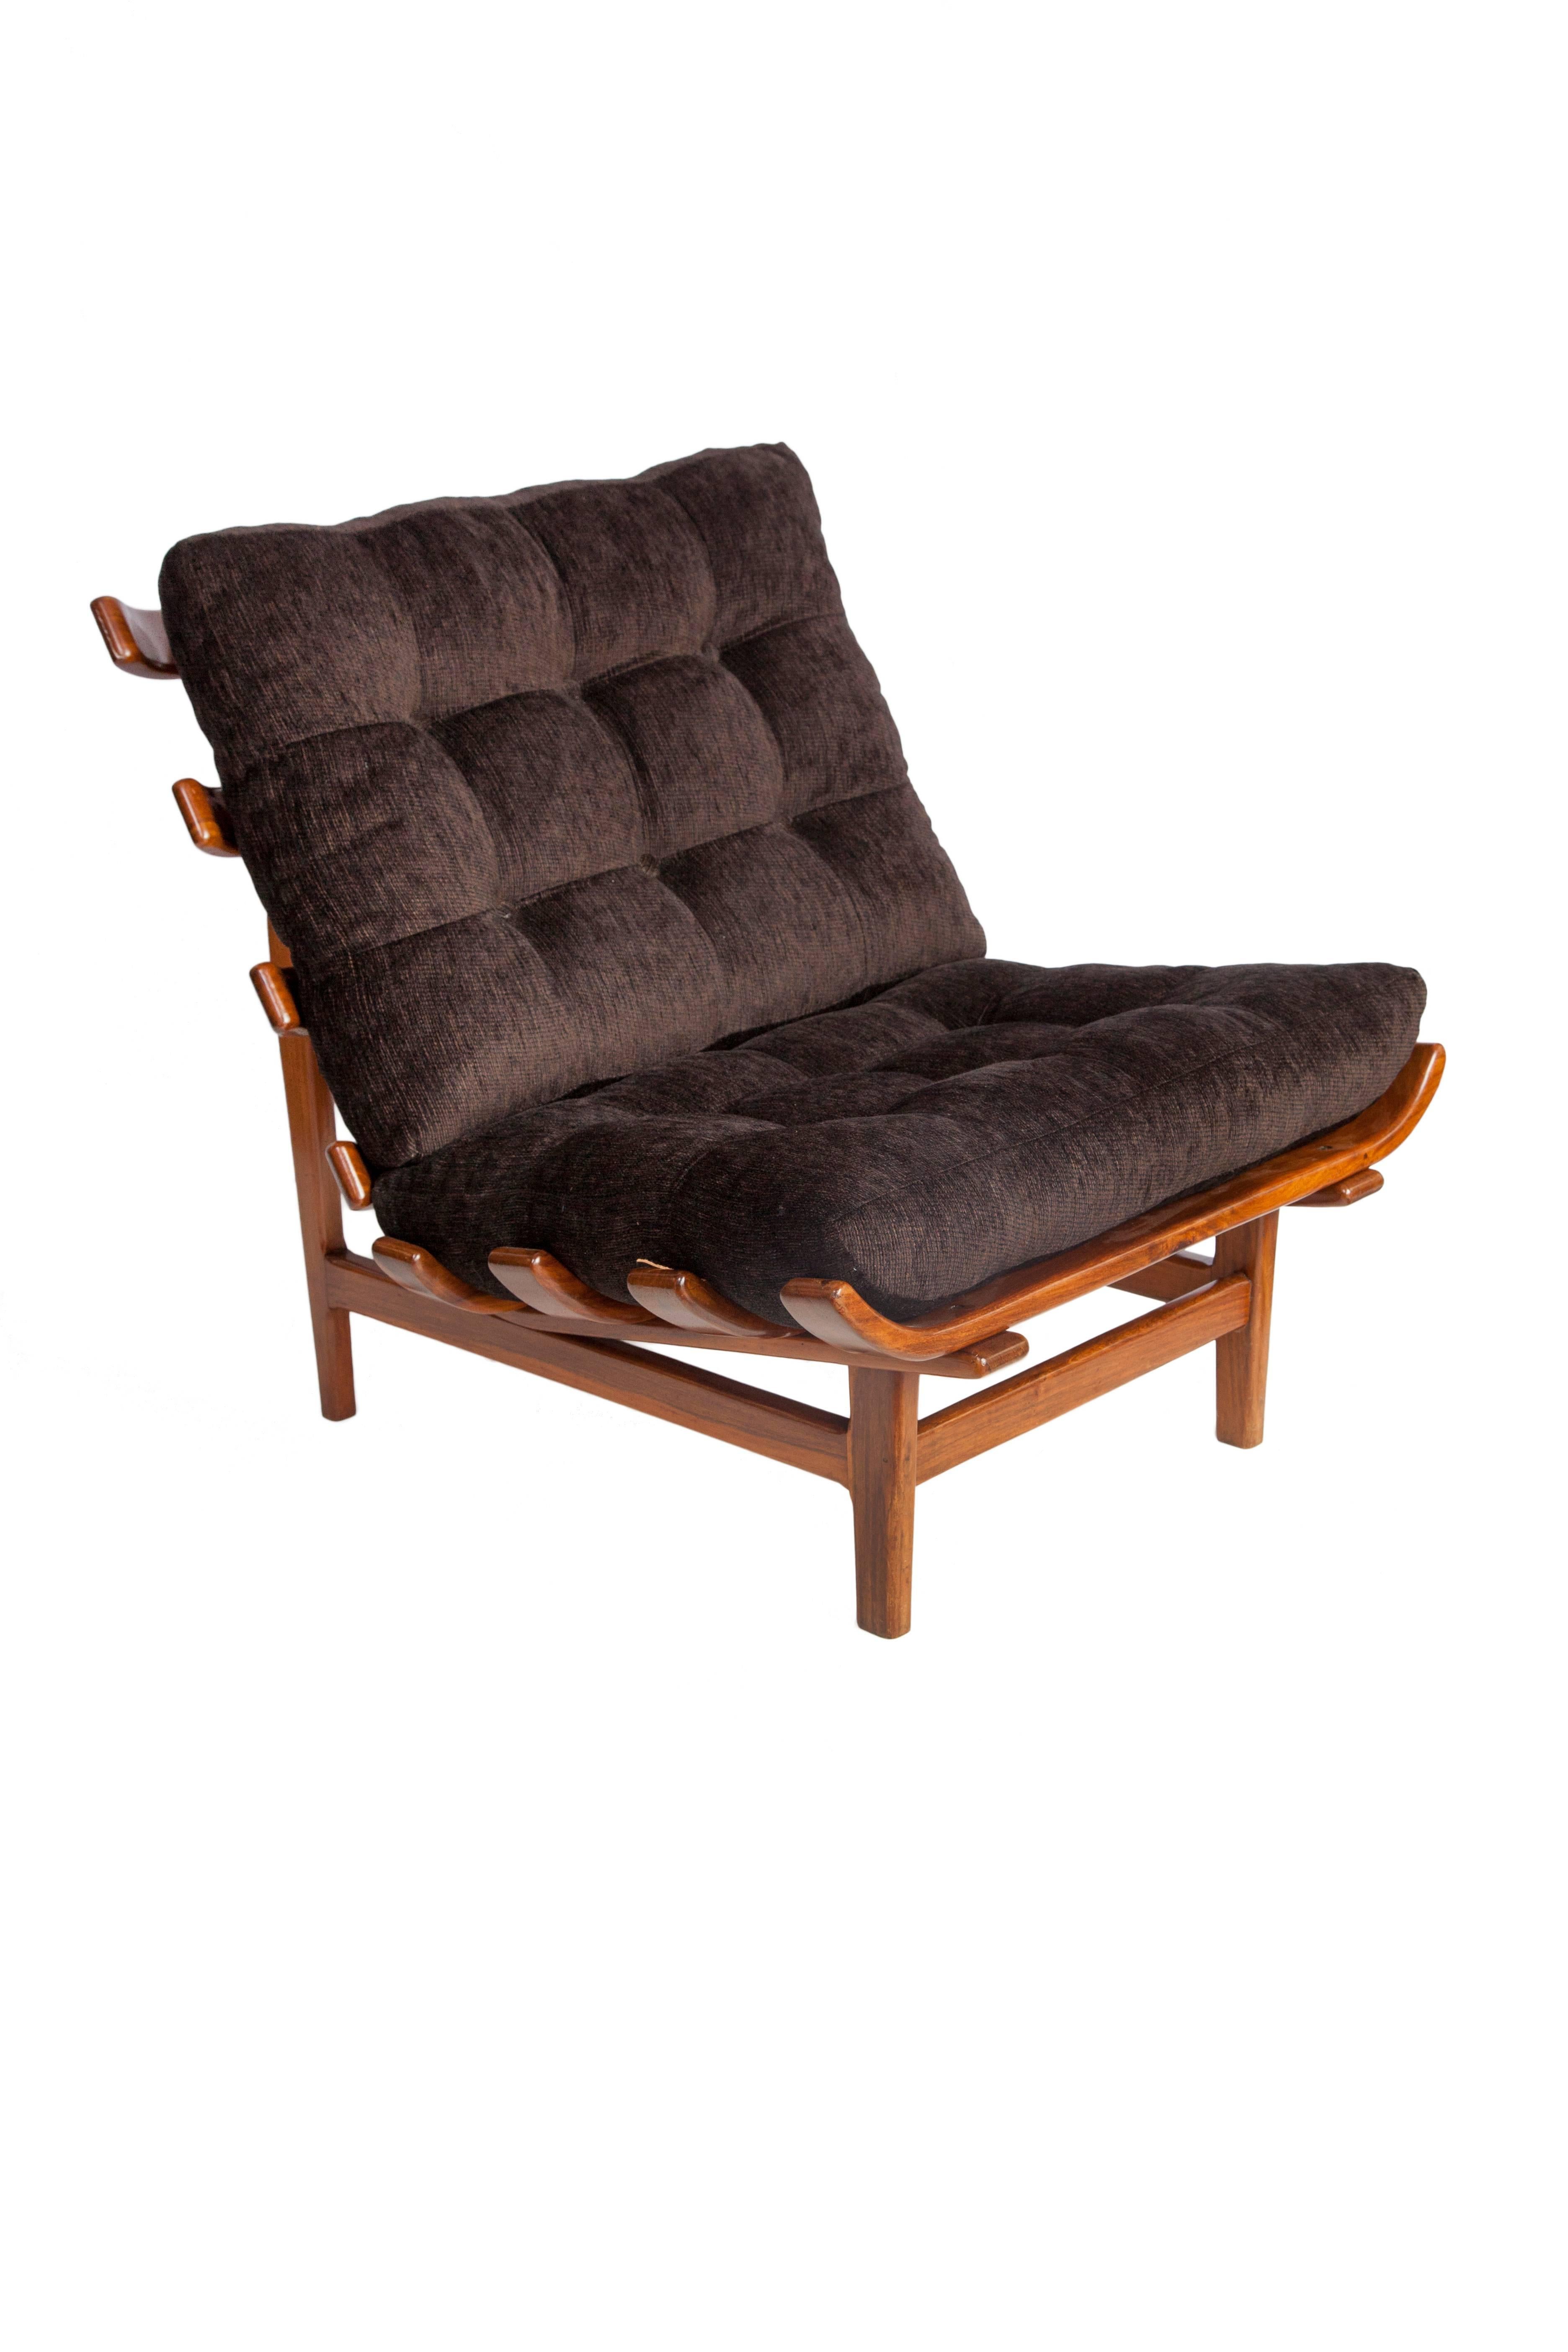 Martin Eisler and Carlo Hauner 'Costela' or rib chair in Brazilian Caviuna wood dating from circa 1950. The chair has been recently reupholstered in black chenille and has a fragment of its original seal located under the seat on one of the wooden